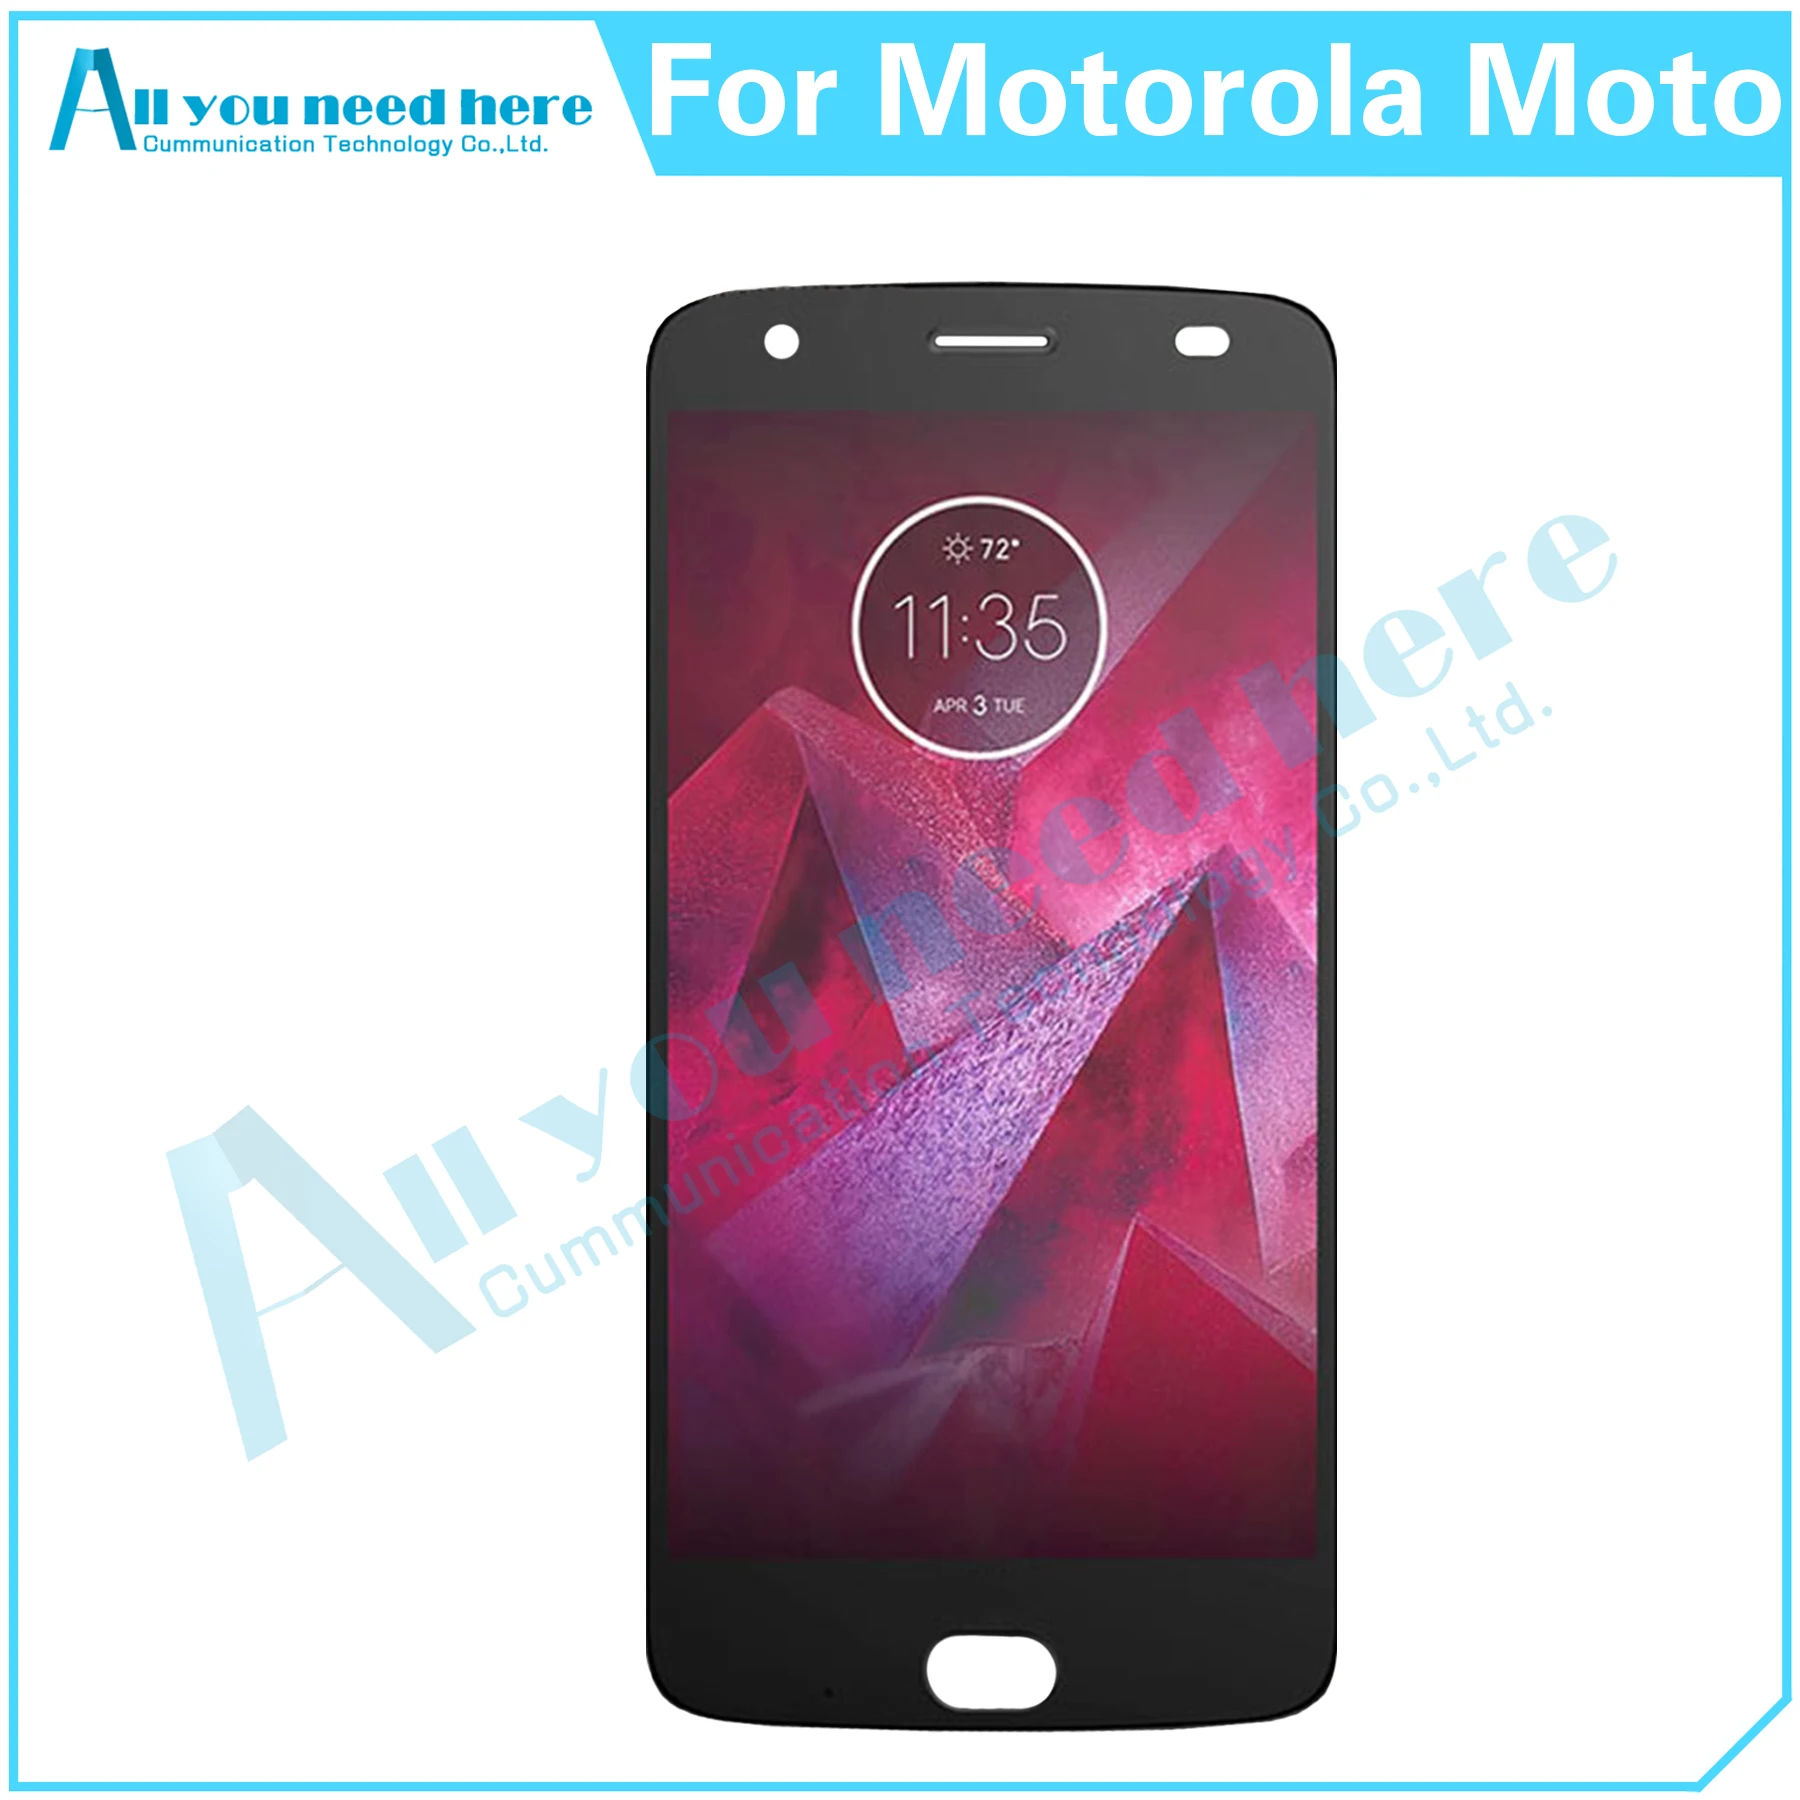 

For Motorola Moto Z2 Force XT1789 XT1789-05 LCD Display Sensor Touch Screen Digitizer Assembly For Z Force 2nd Gen Replacement